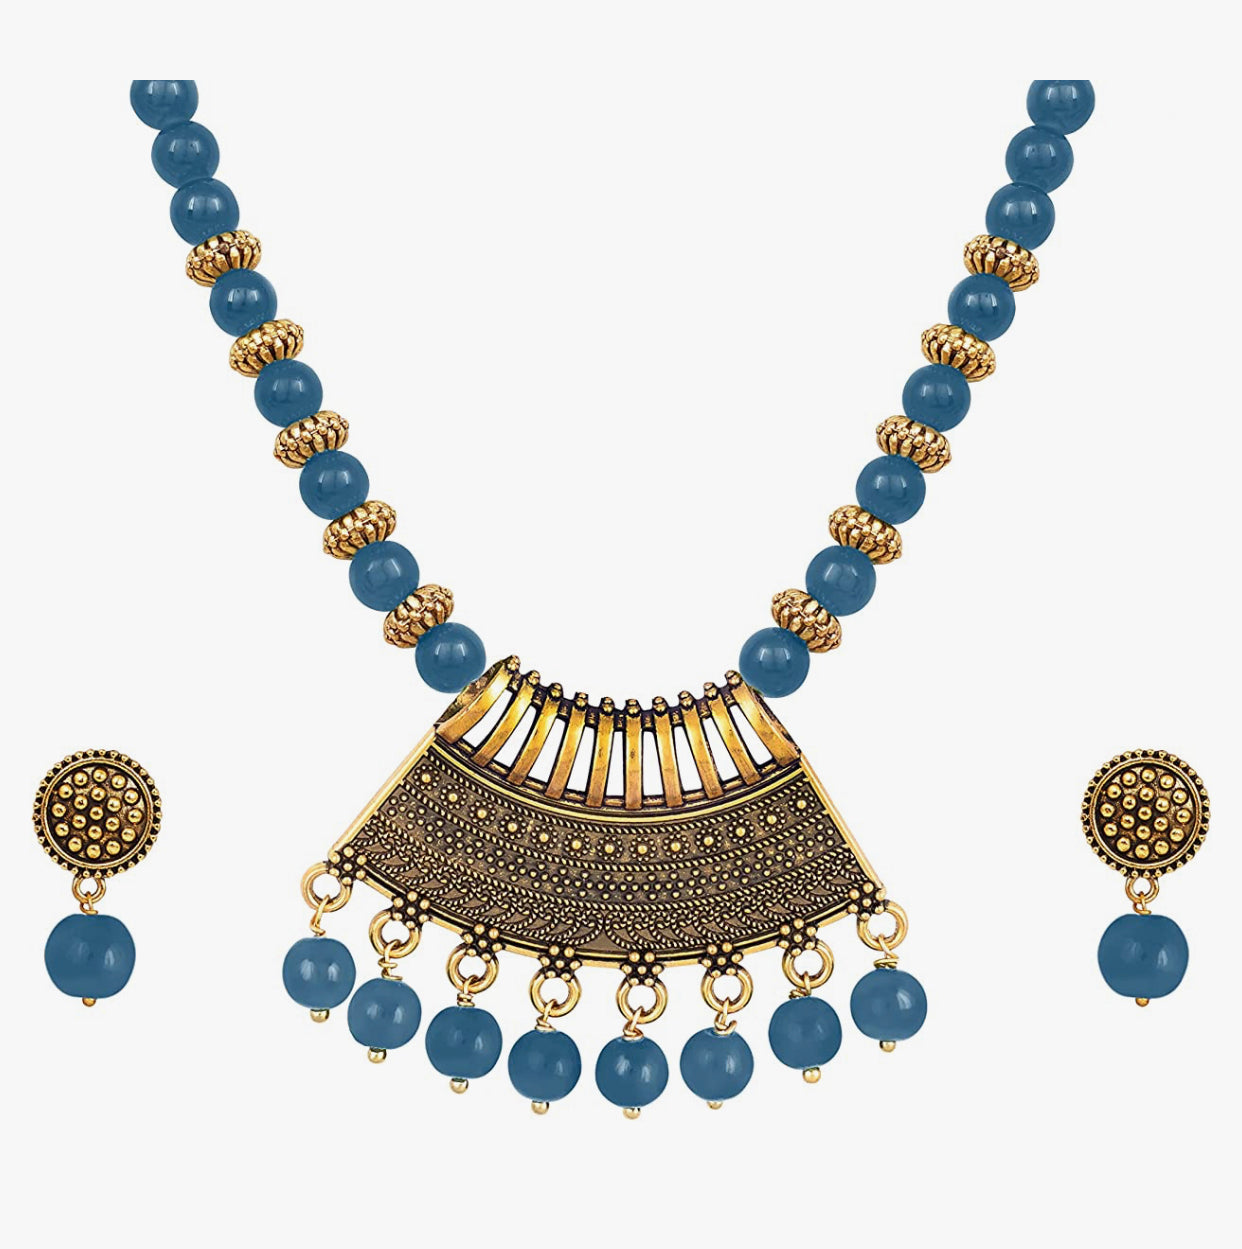 Gold Plated Antique Semi-Circle Pendant Beaded Tribal Necklace Set for Women